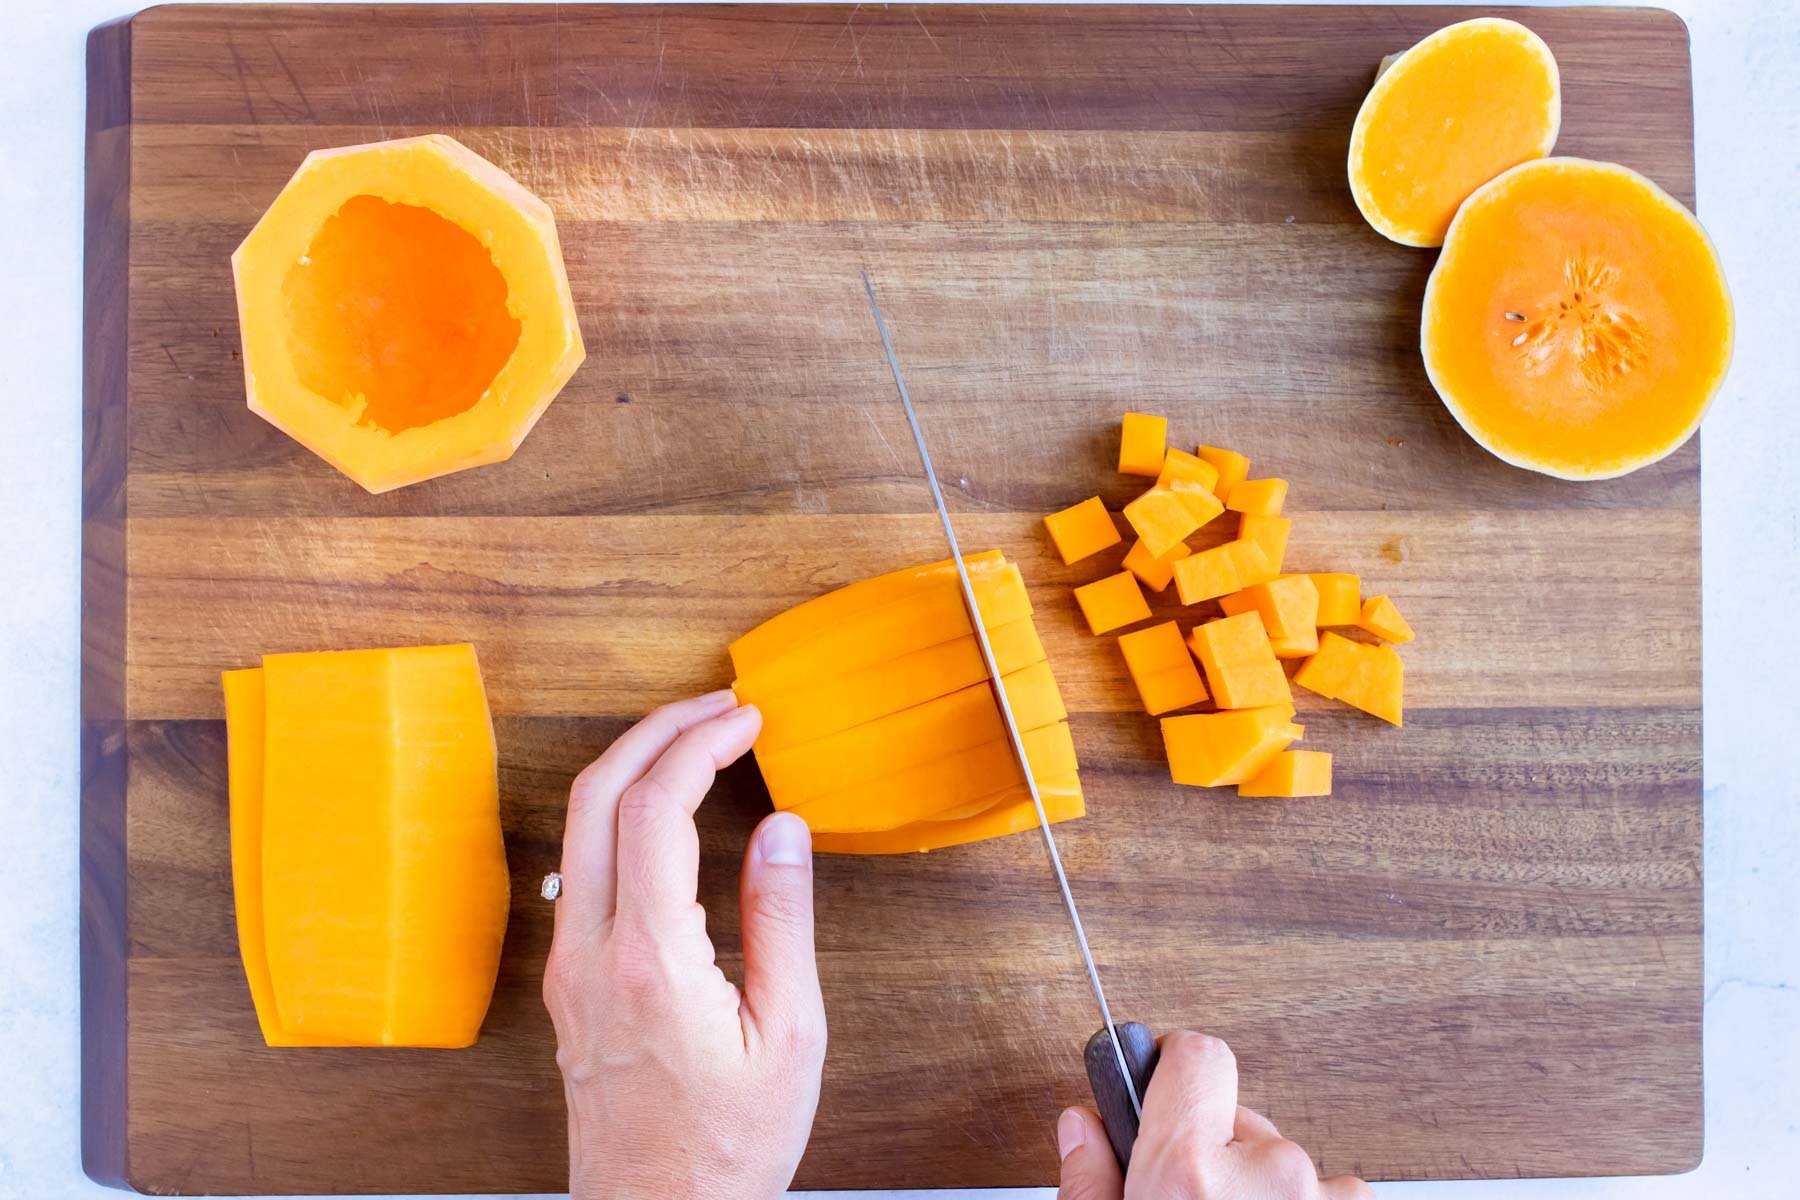 Prepared butternut squash is cubed before roasting in the oven.